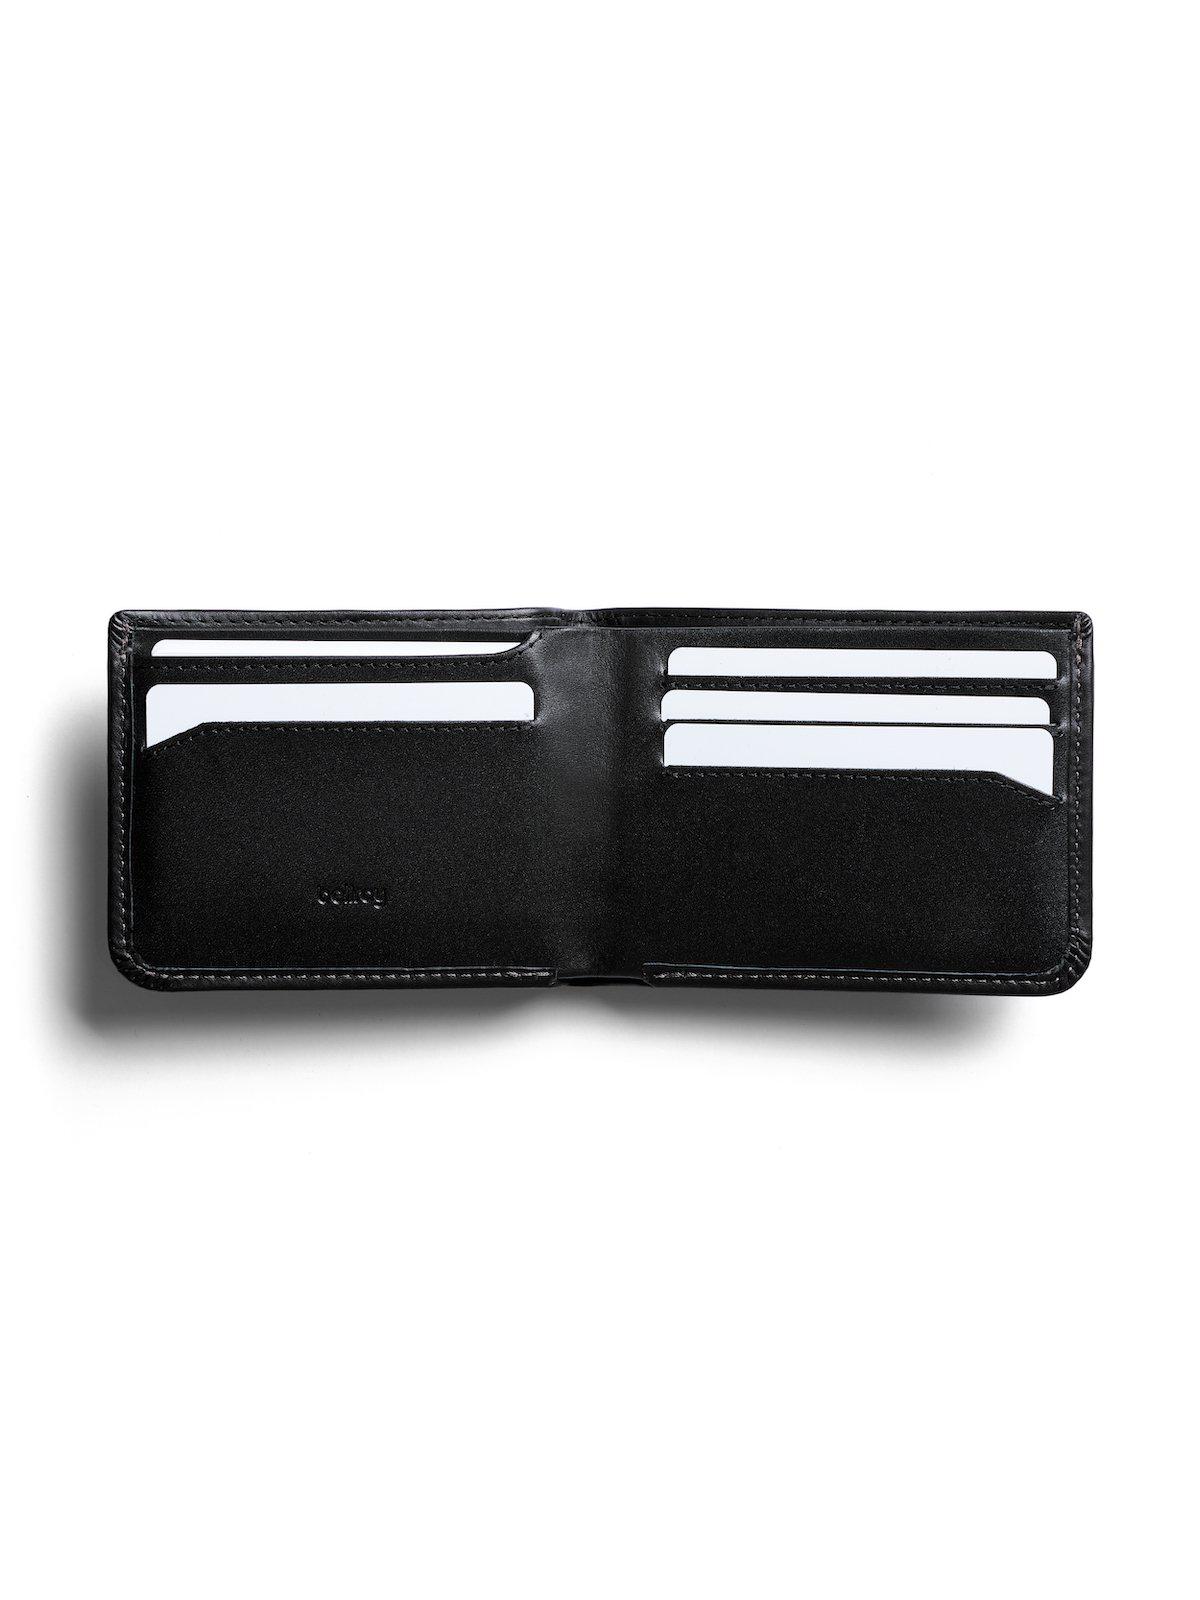 Bellroy Hide and Seek Wallet Black RFID - MORE by Morello Indonesia